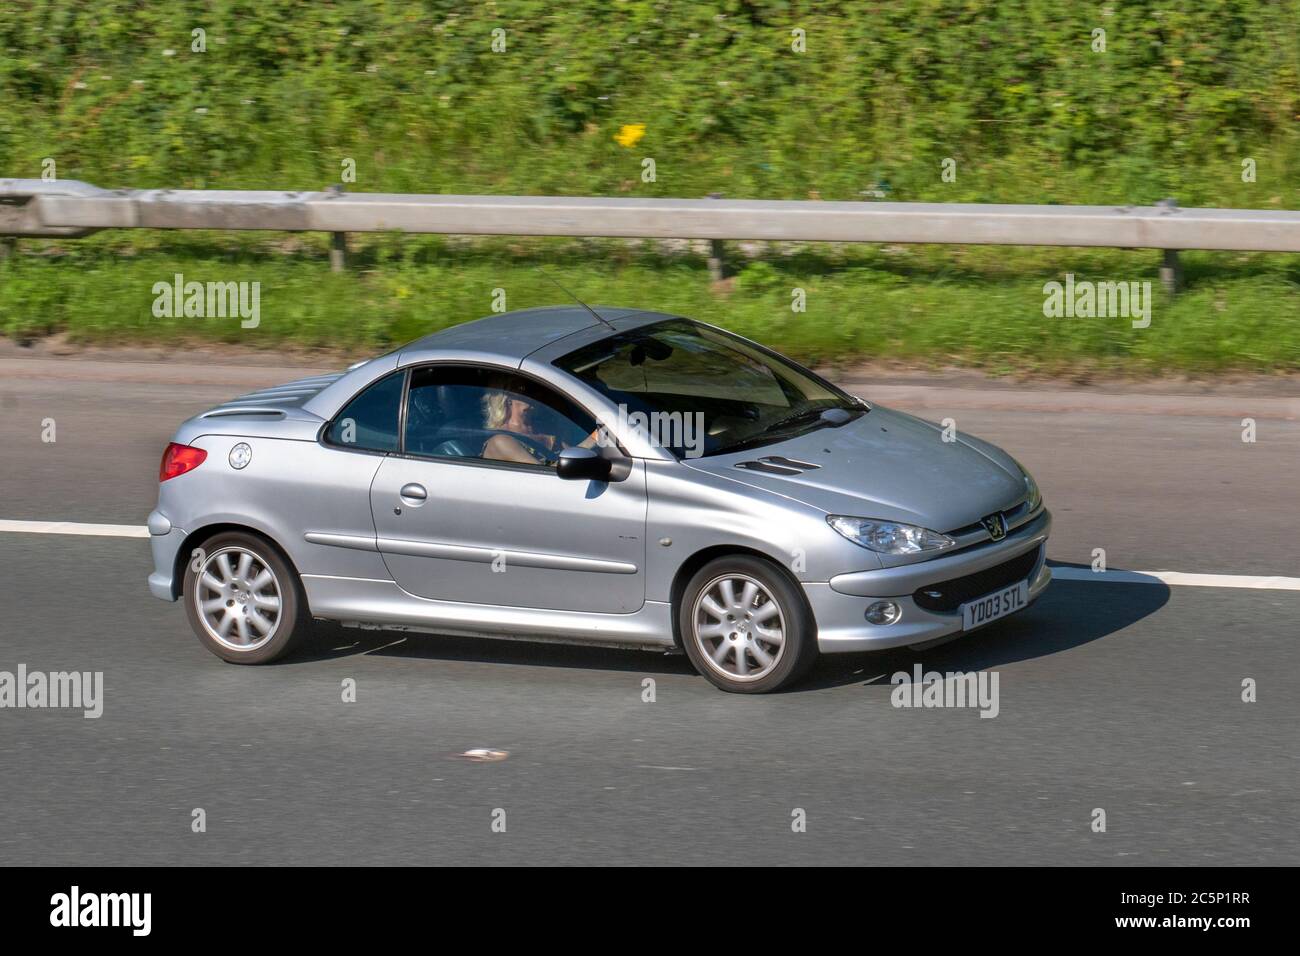 2003 silver Peugeot 206 CC; Vehicular traffic moving vehicles, cars driving vehicle on UK roads, motors, motoring on the M6 motorway highway network. Stock Photo